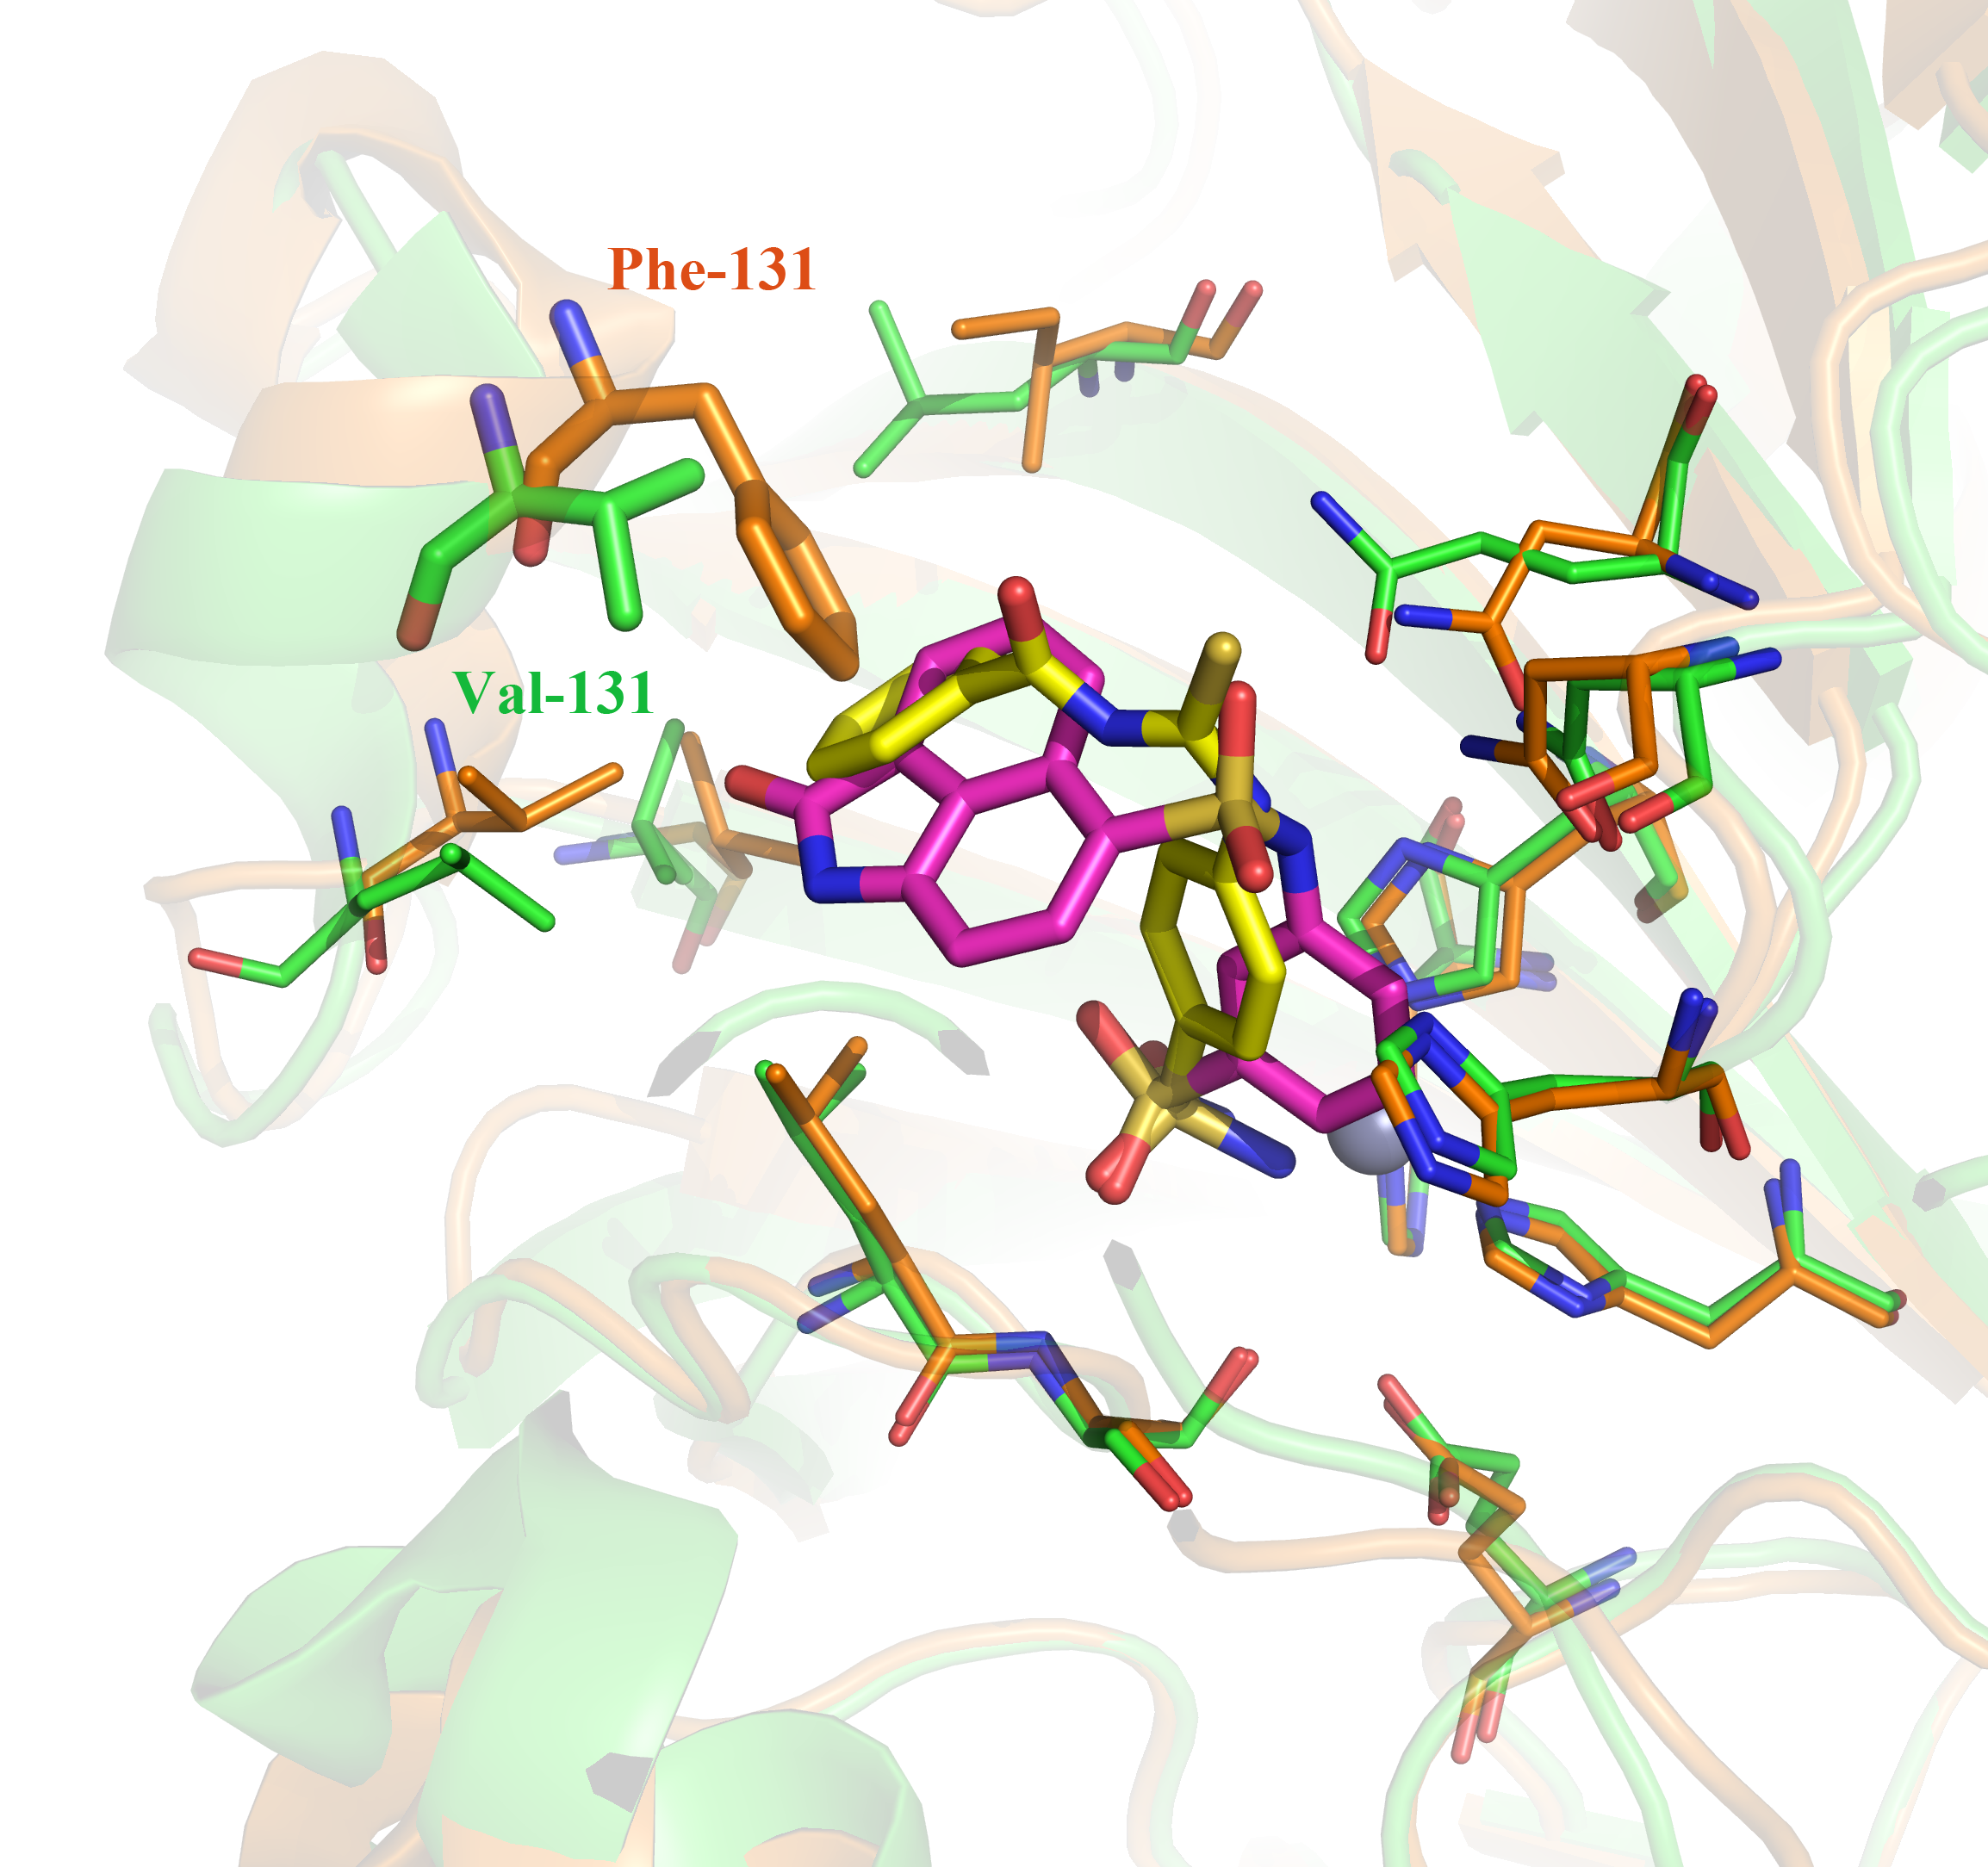 Identification of novel CAs inhibitors from the chemical database